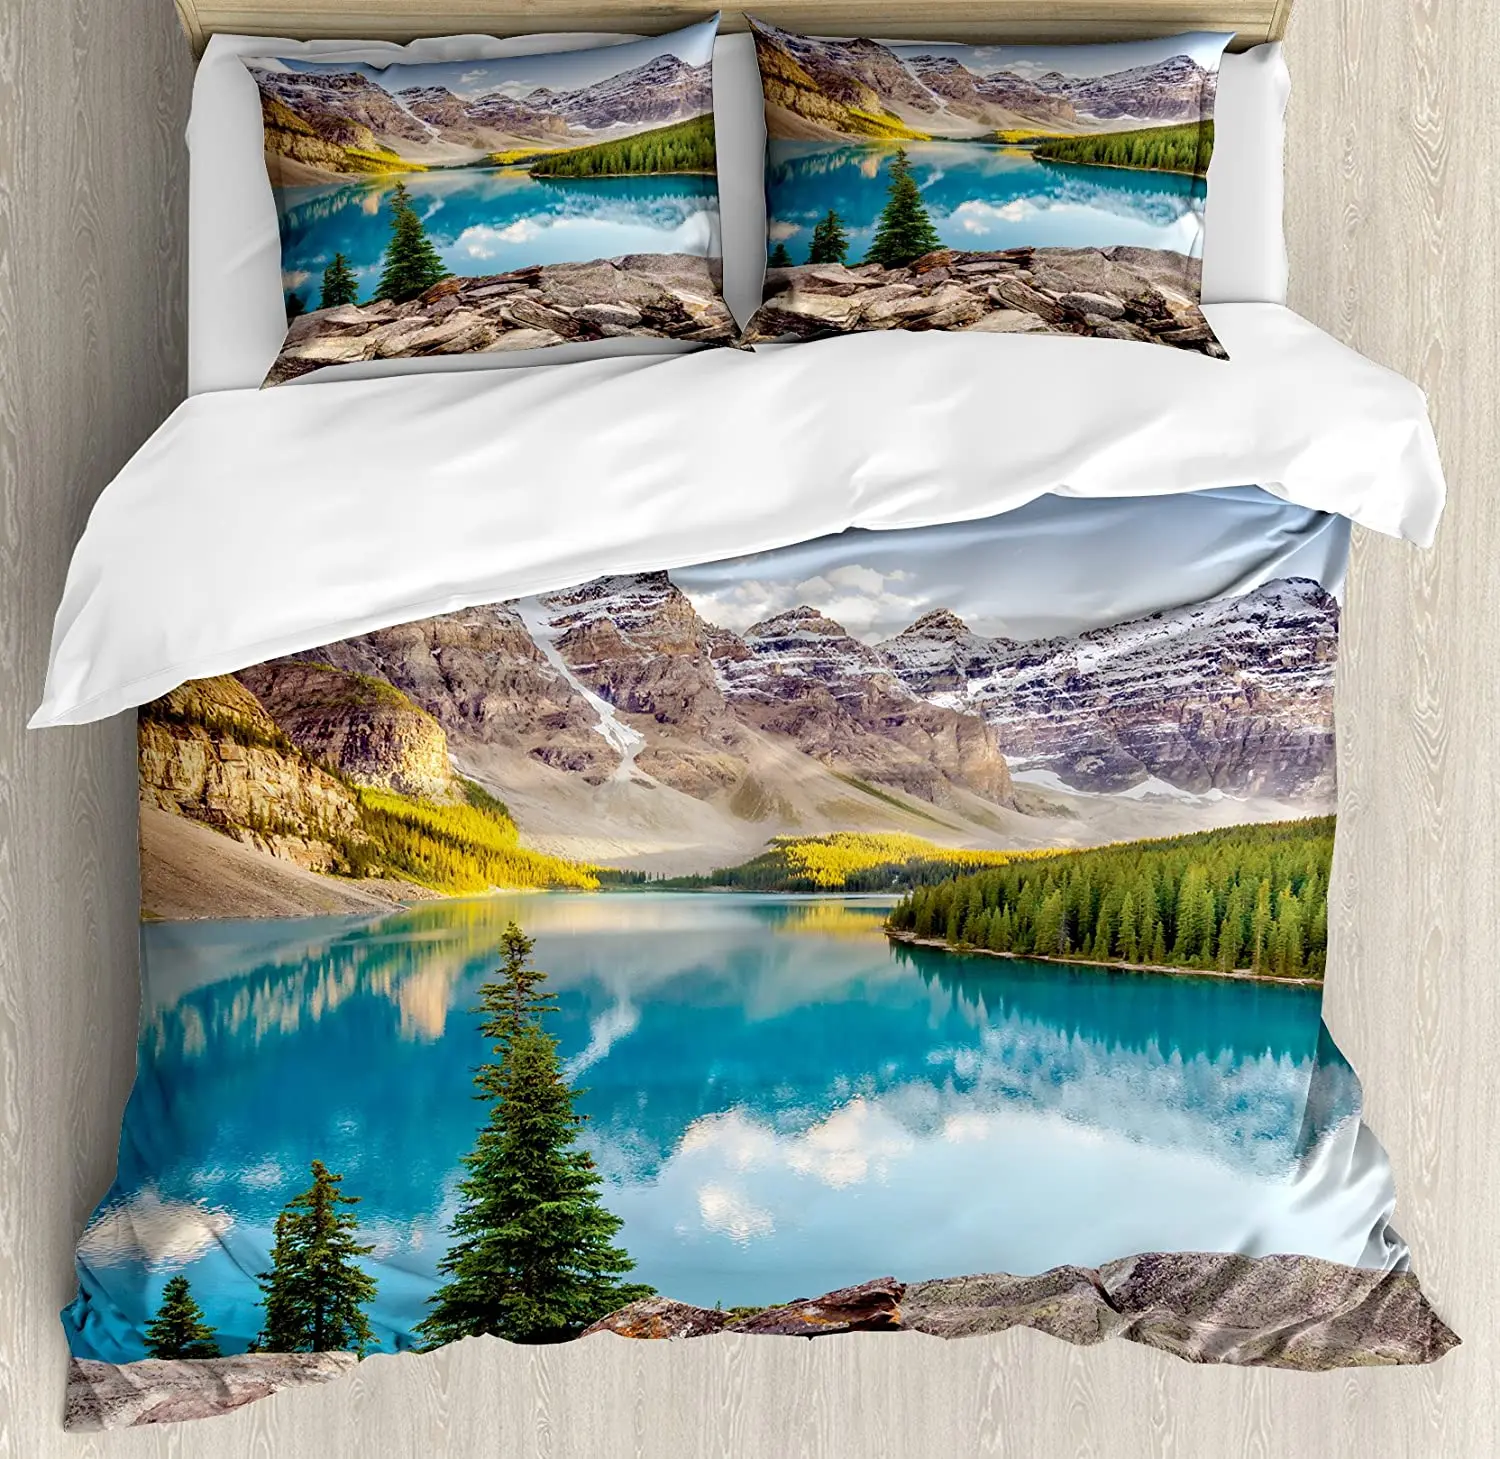 

Landscape Bedding Set For Bedroom Bed Home Idyllic View of Moraine Lake at Sunset in Canad Duvet Cover Quilt Cover Pillowcase